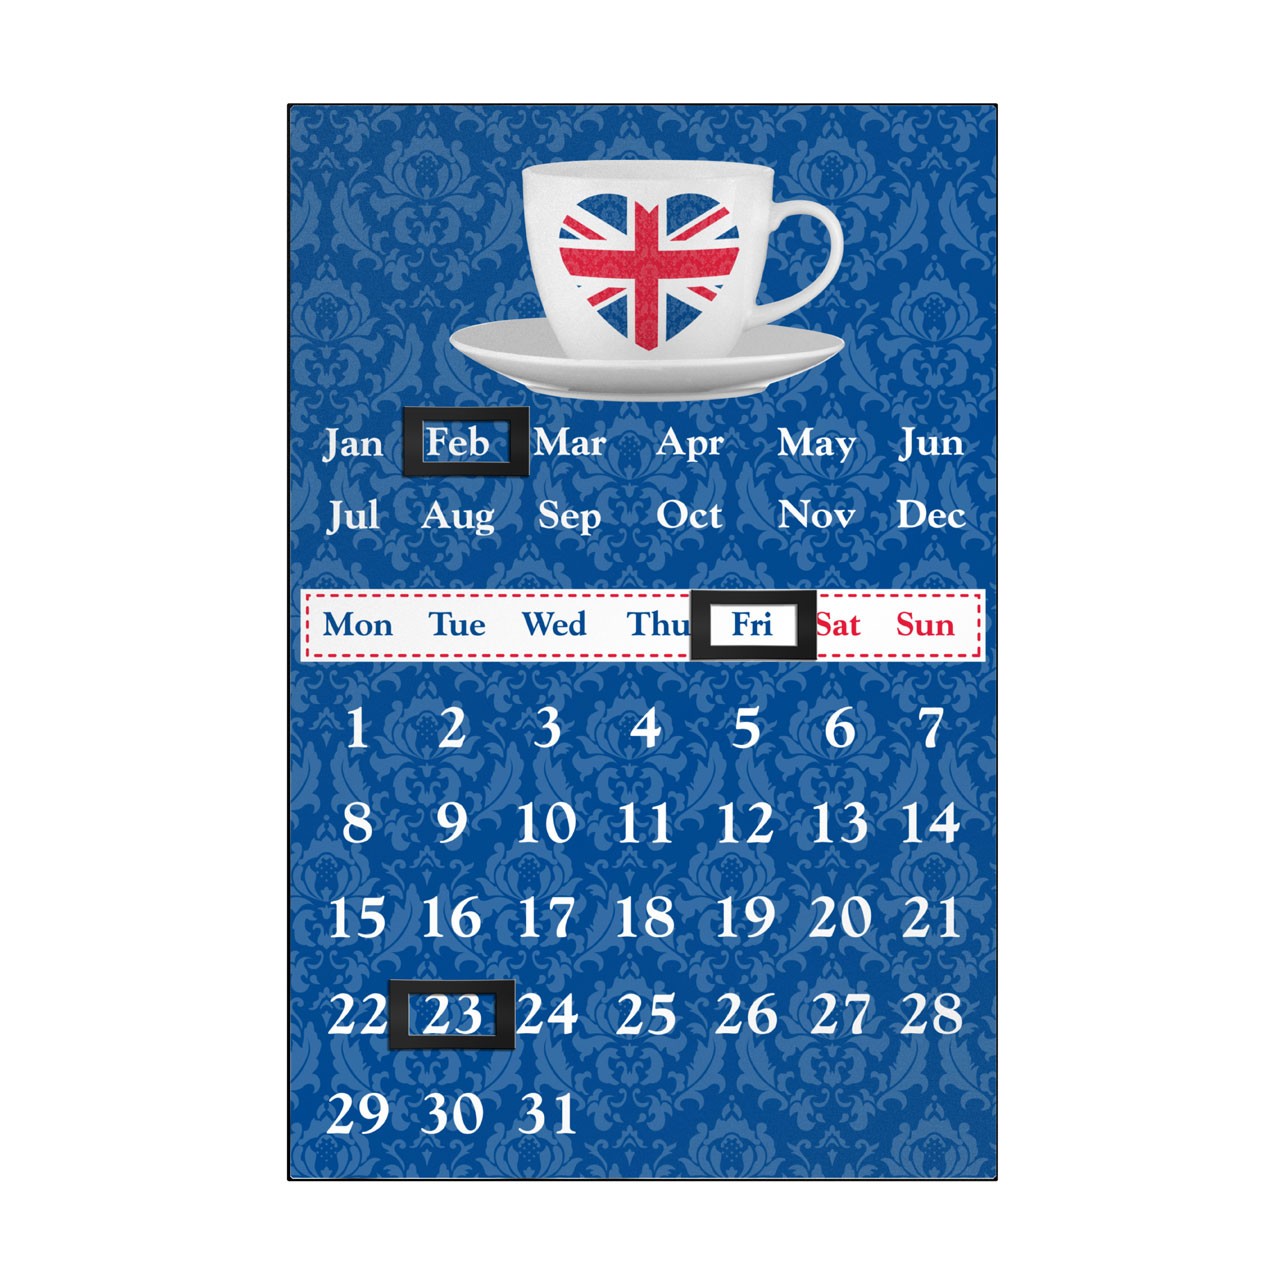 Union Jack Magnetic Calendar Keep Up to Date Daily Routines